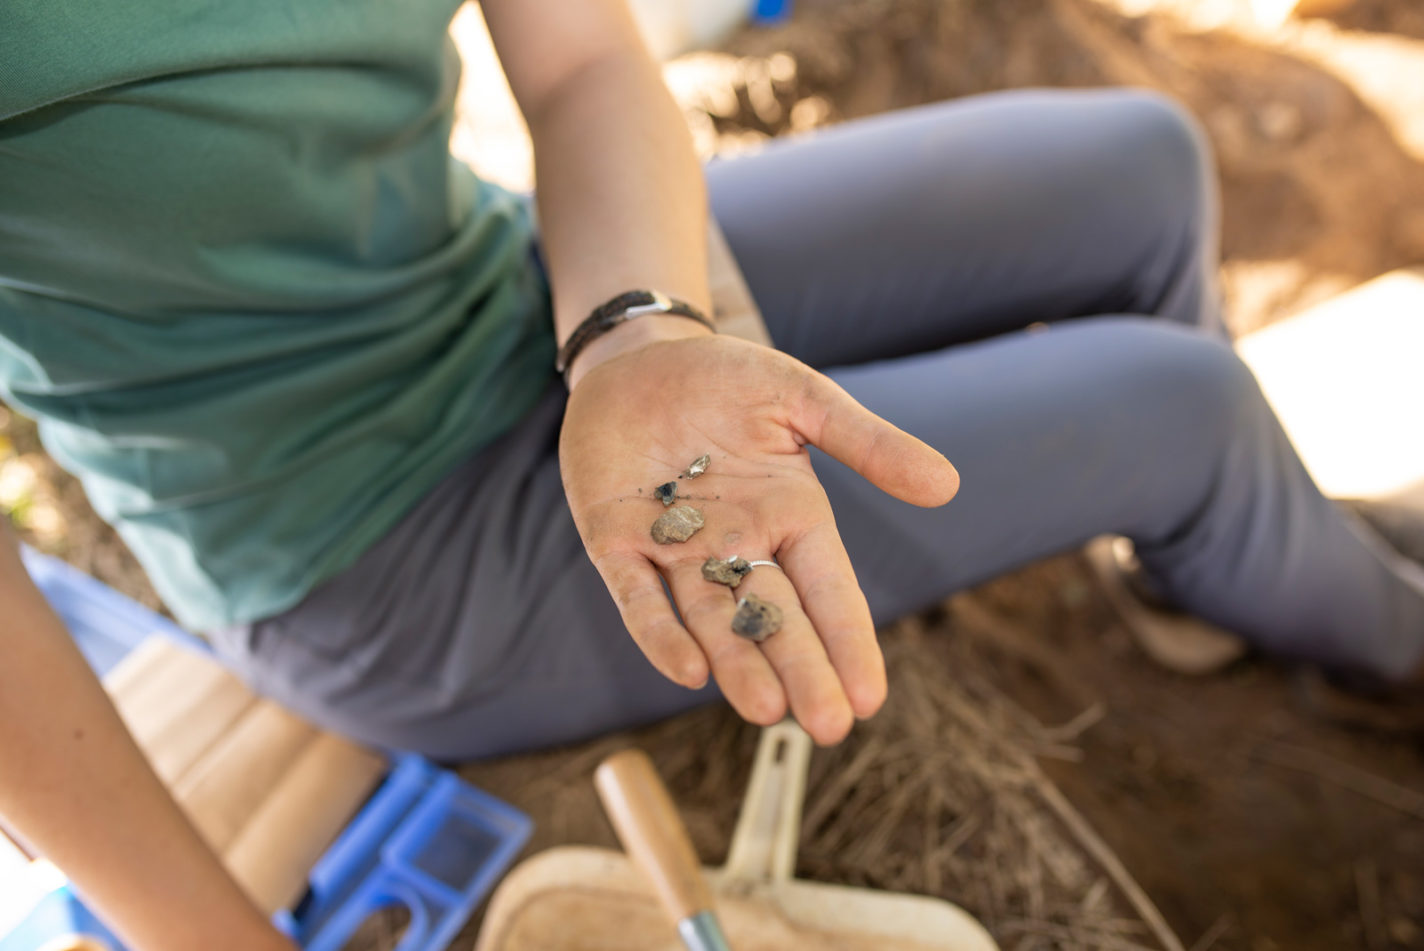 A woman's outretched hand holds fragments of burned bones uncovered at an archaeology site